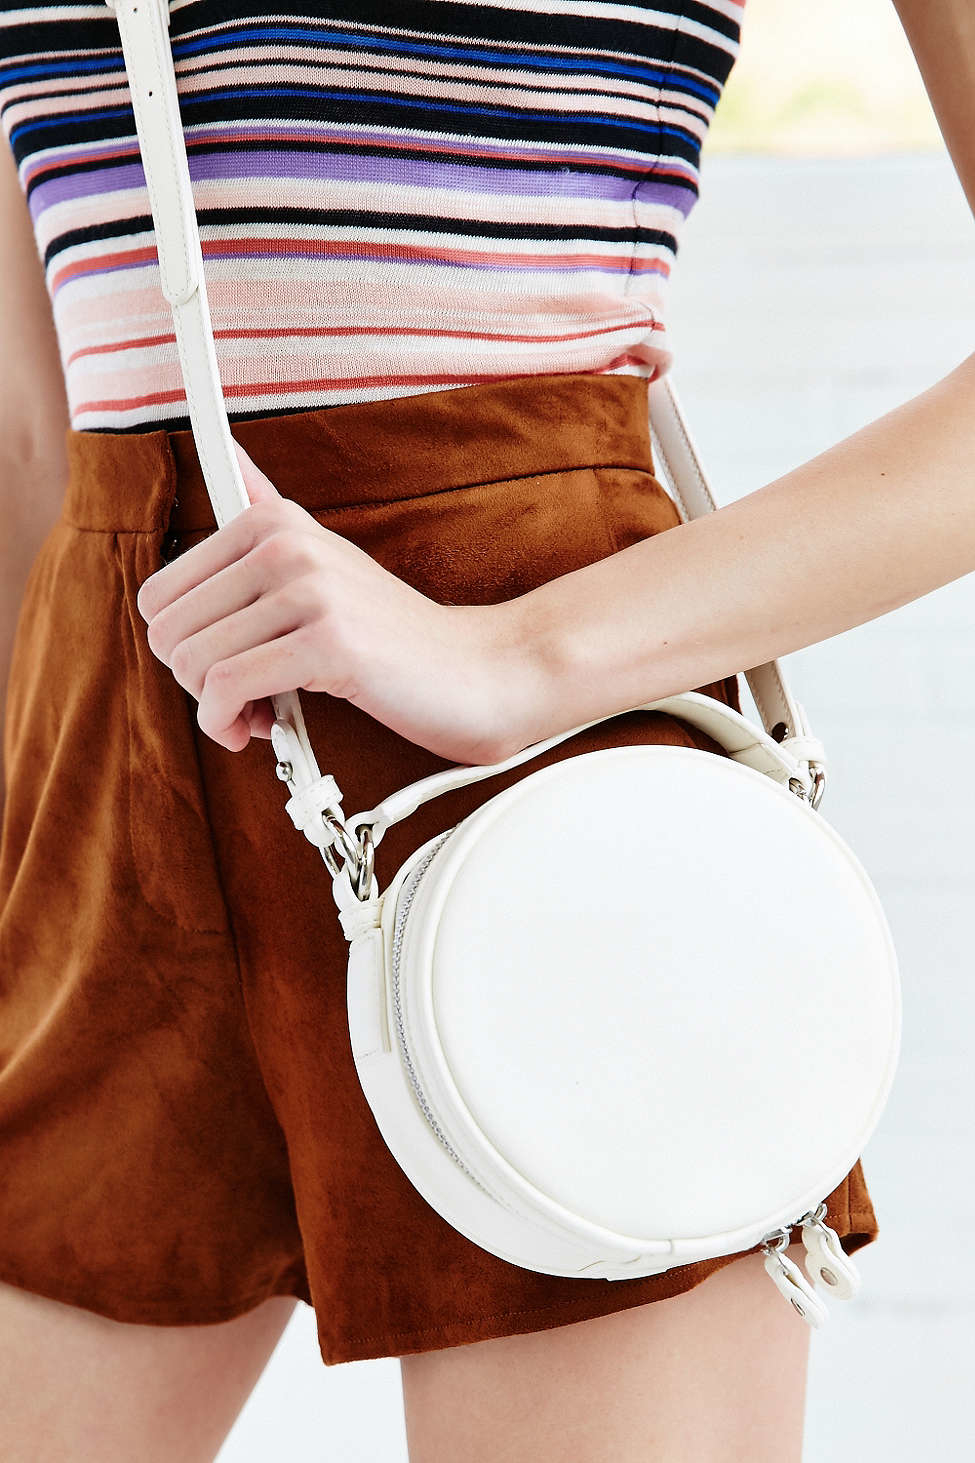 White round clutch | ClutchesandMore – Clutches and More